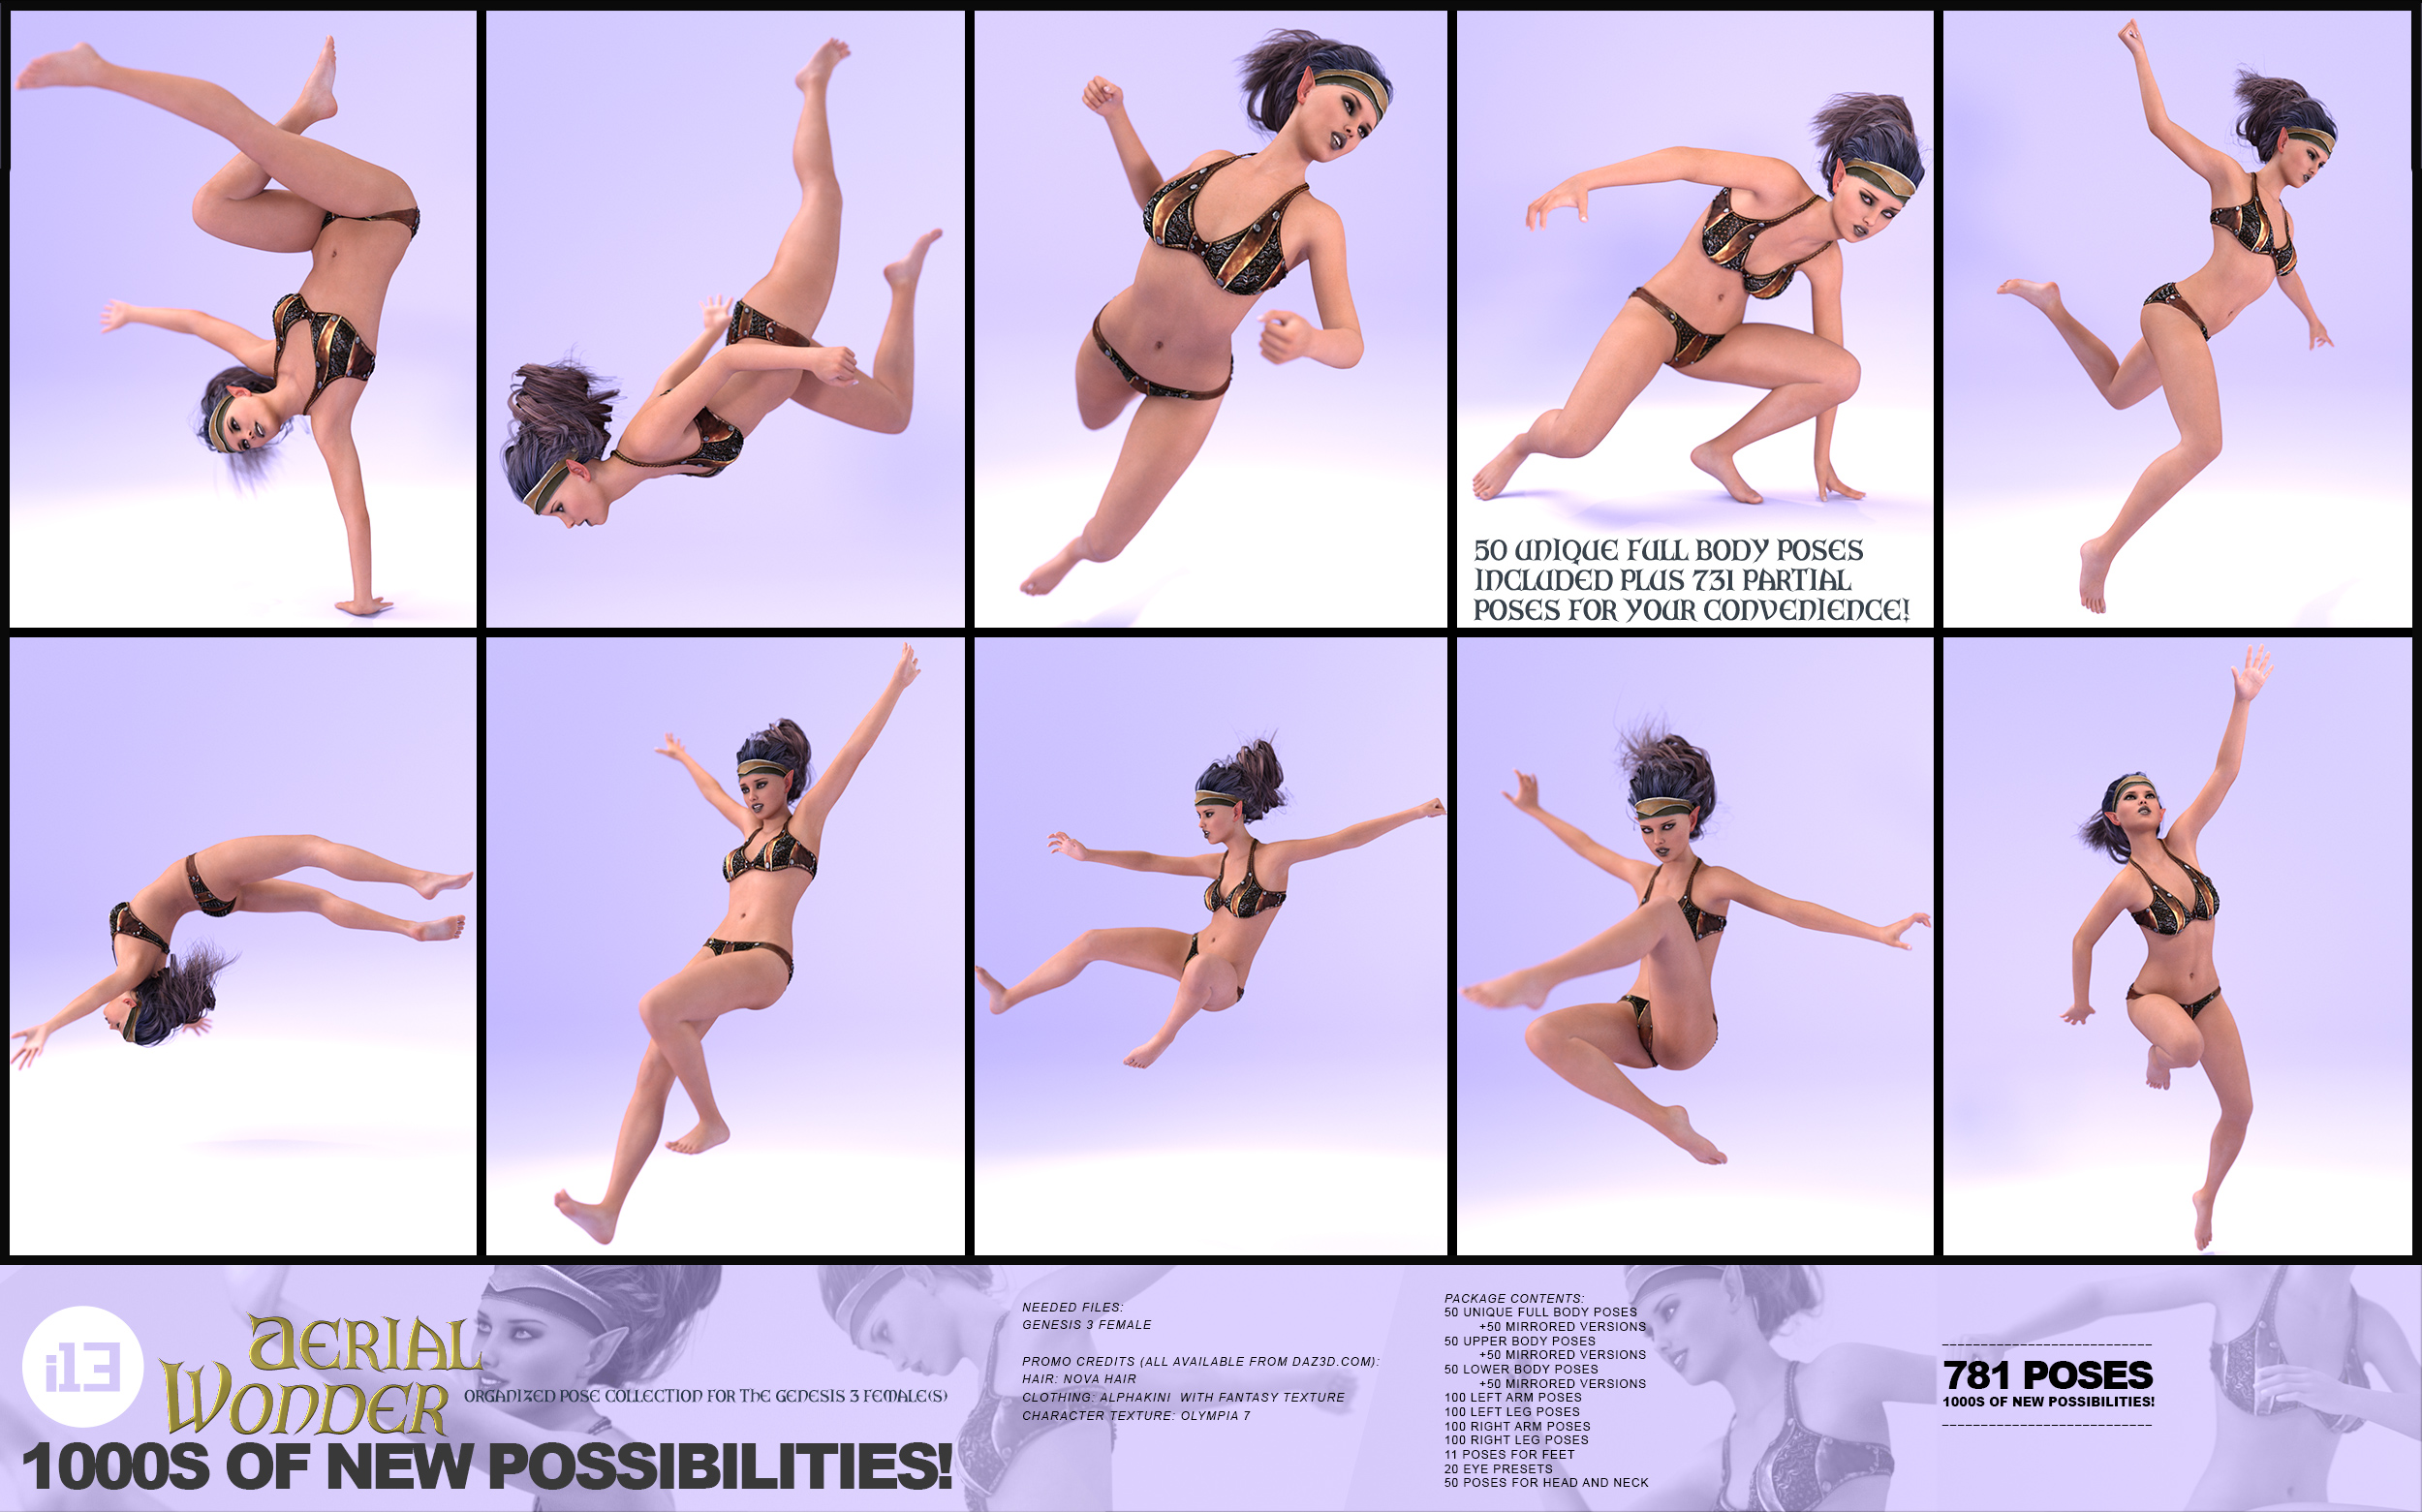 i13 Aerial Wonder for the Genesis 3 Female(s) by: ironman13, 3D Models by Daz 3D